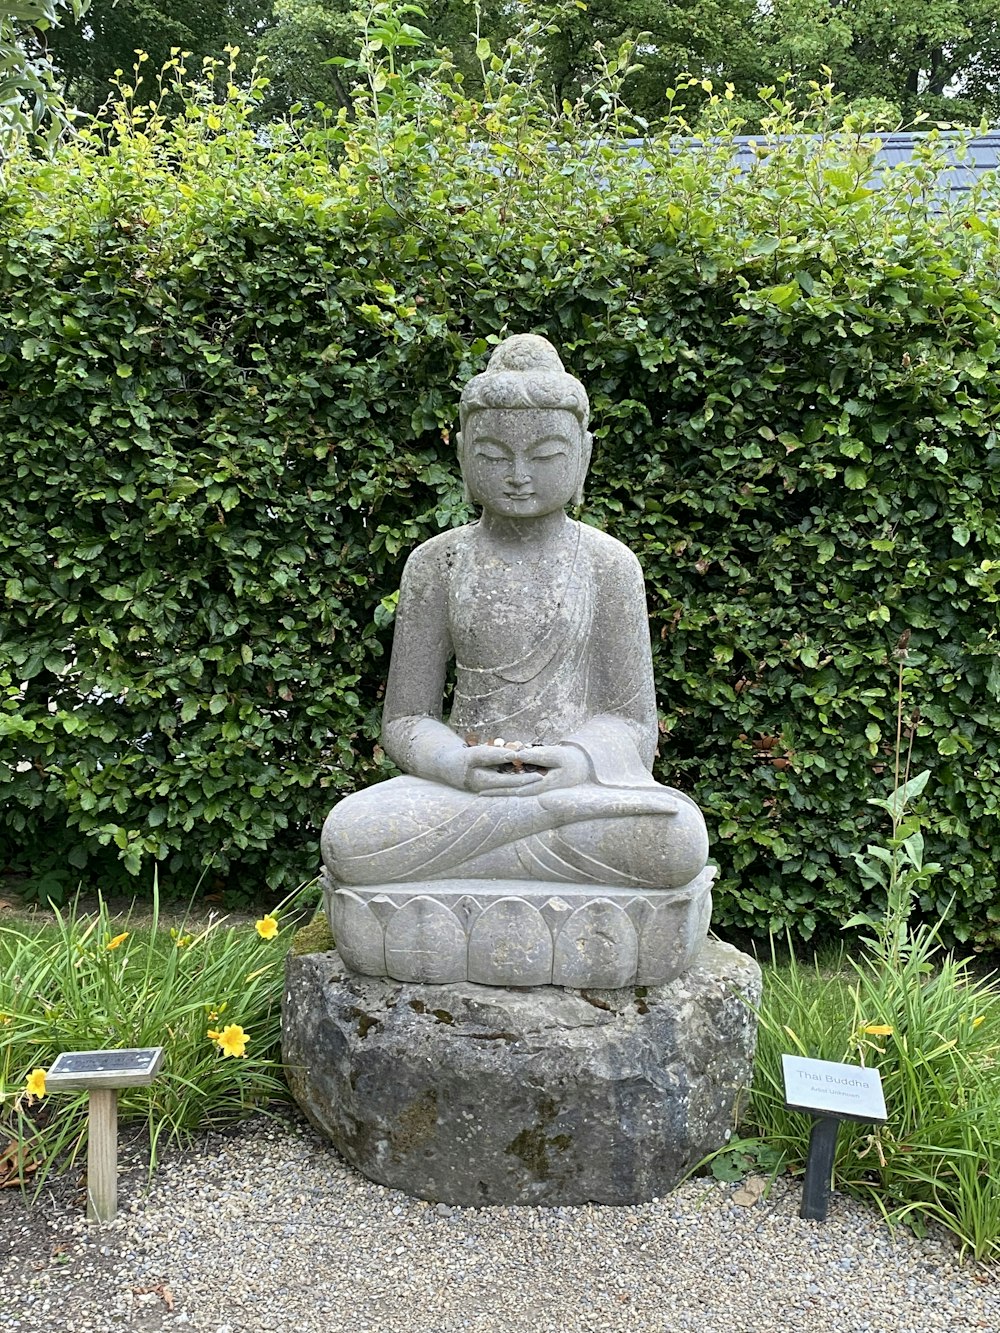 a statue of a person sitting on a rock in front of a hedge